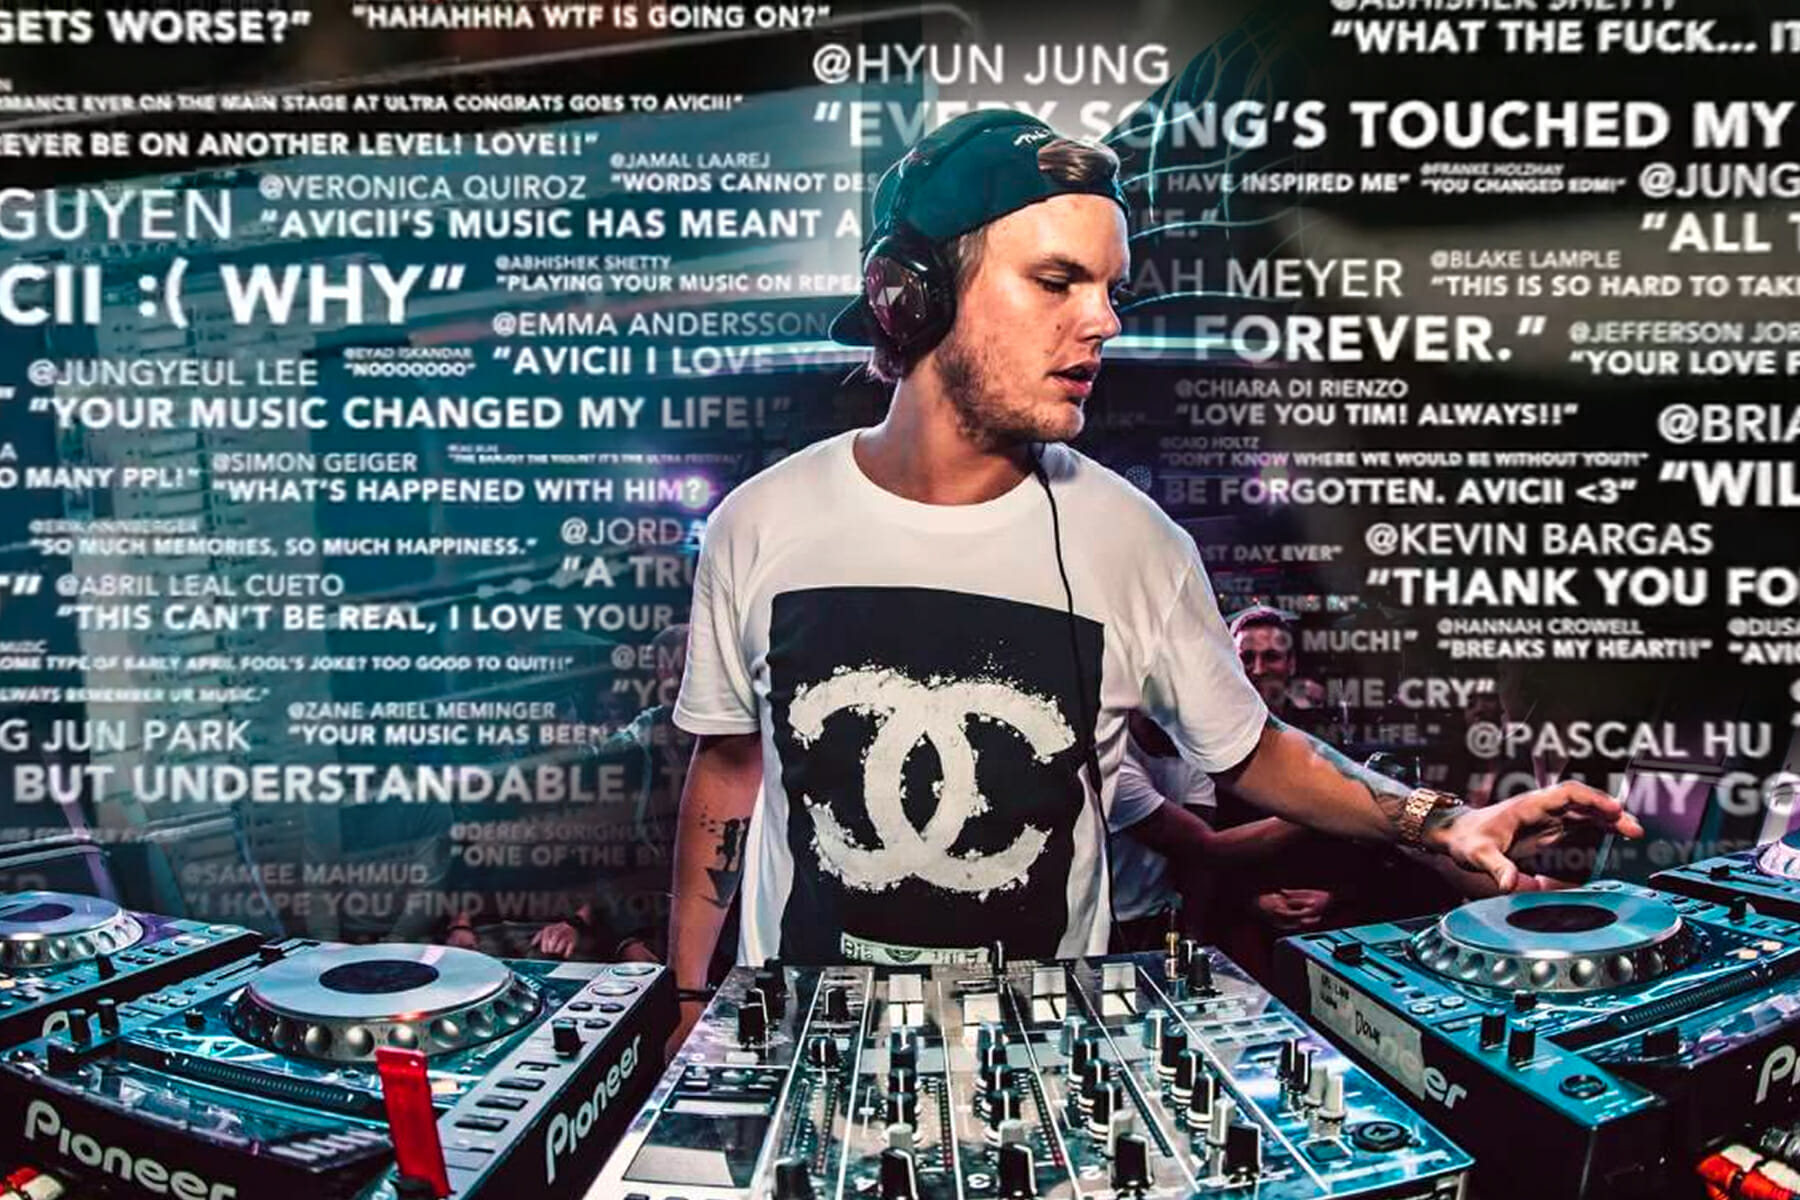 “It was his best music in years, honestly”: Avicii’s A&R man speaks on plans for his unreleased musicAvicii